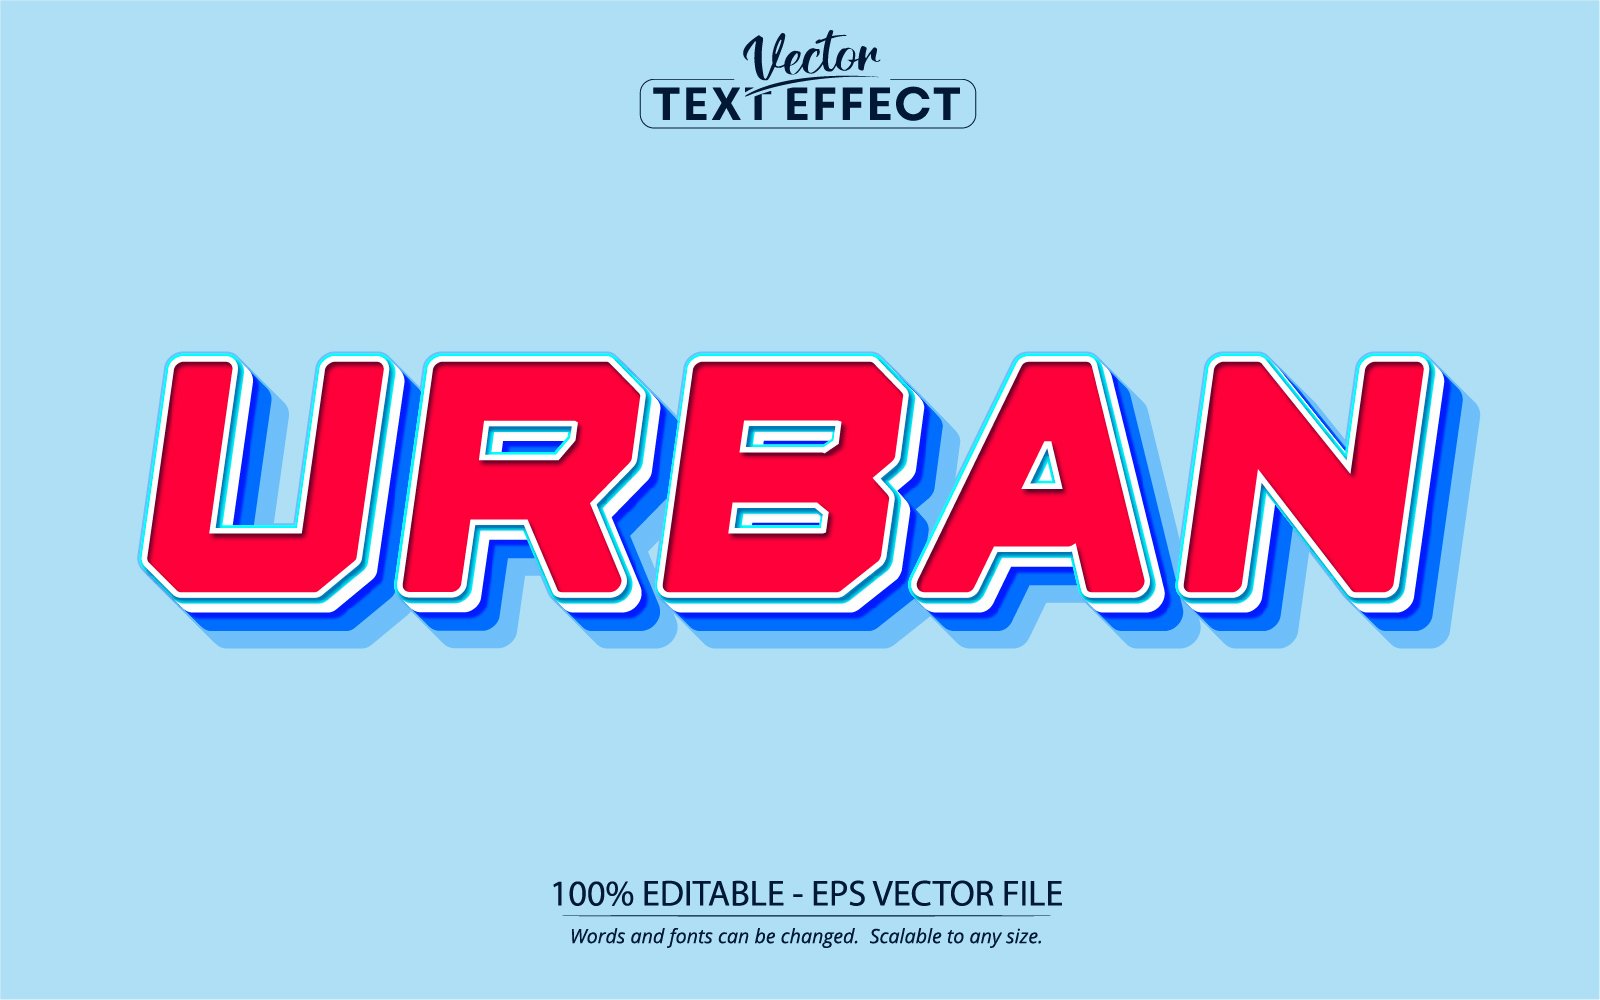 Urban - Editable Text Effect, Comic And Cartoon Text Style, Graphics Illustration